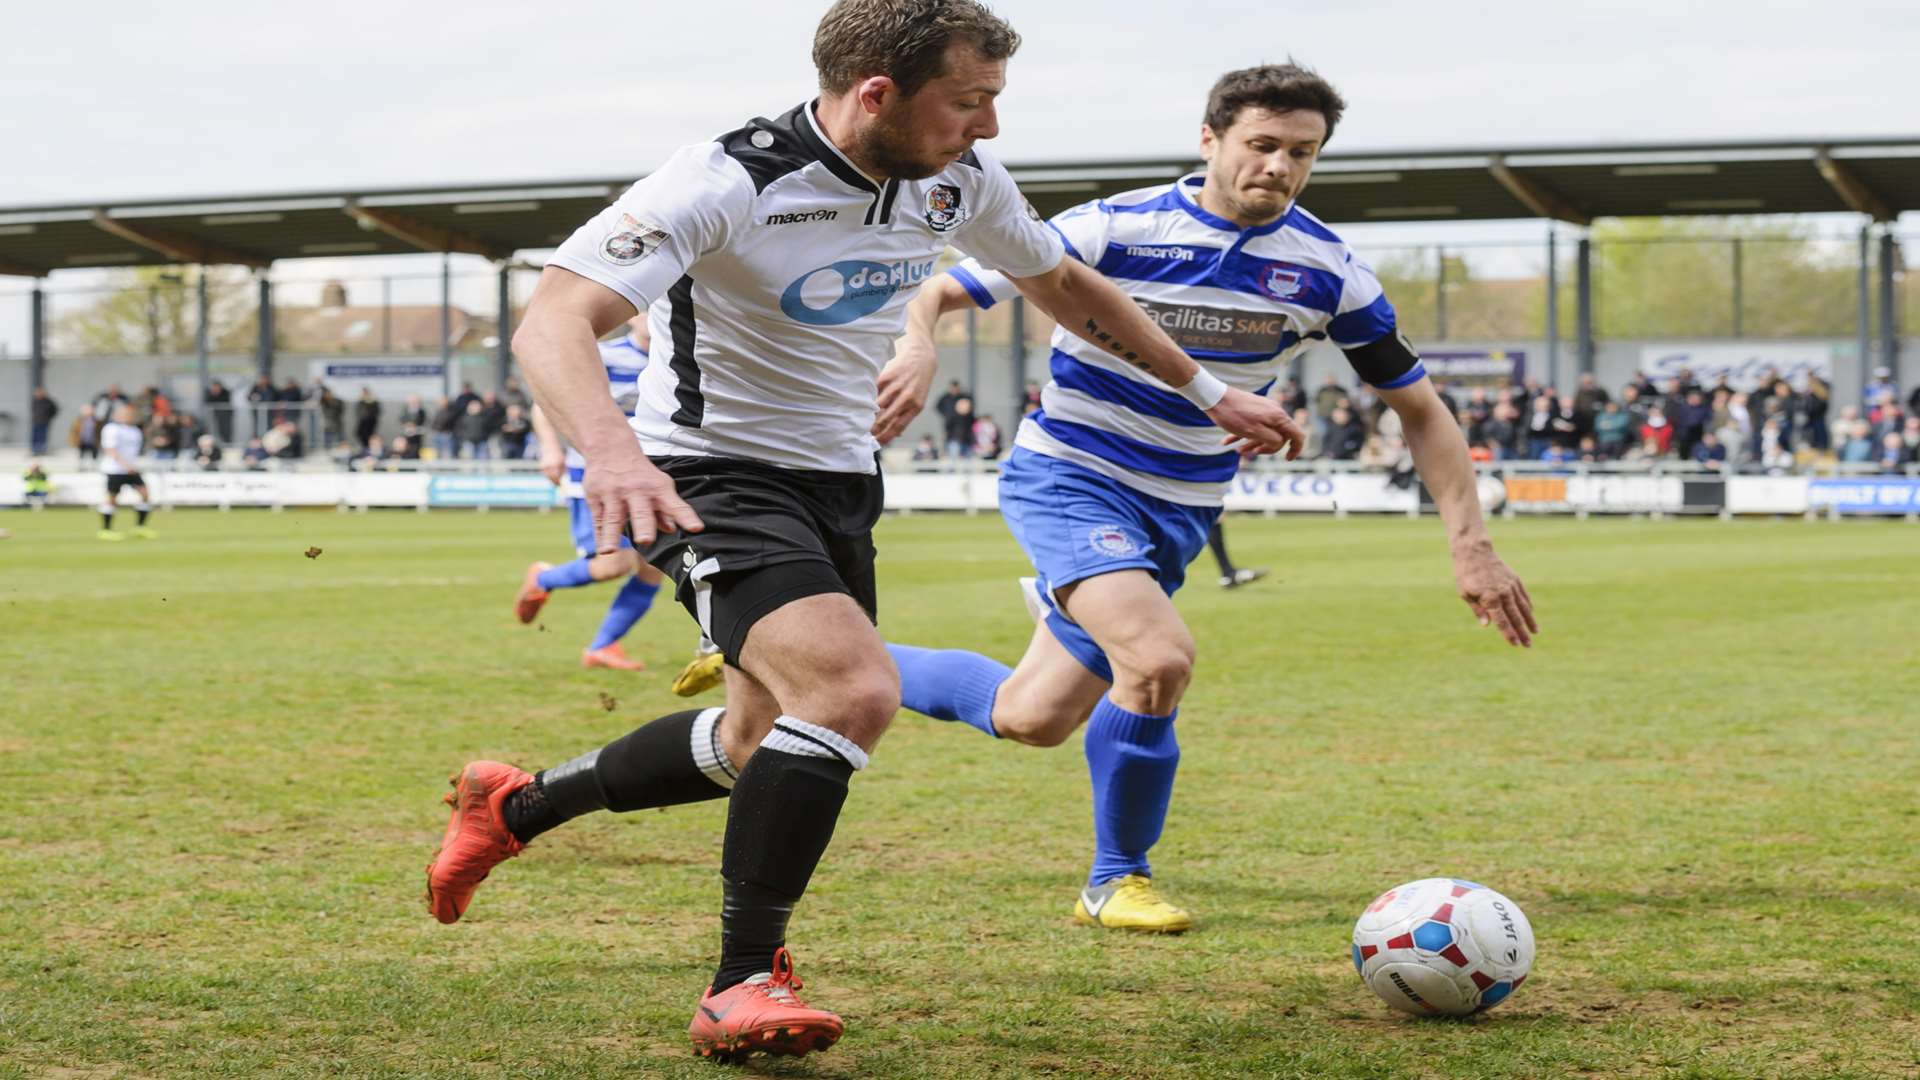 Ryan Hayes looks to make ground down the Dartford right Picture: Andy Payton